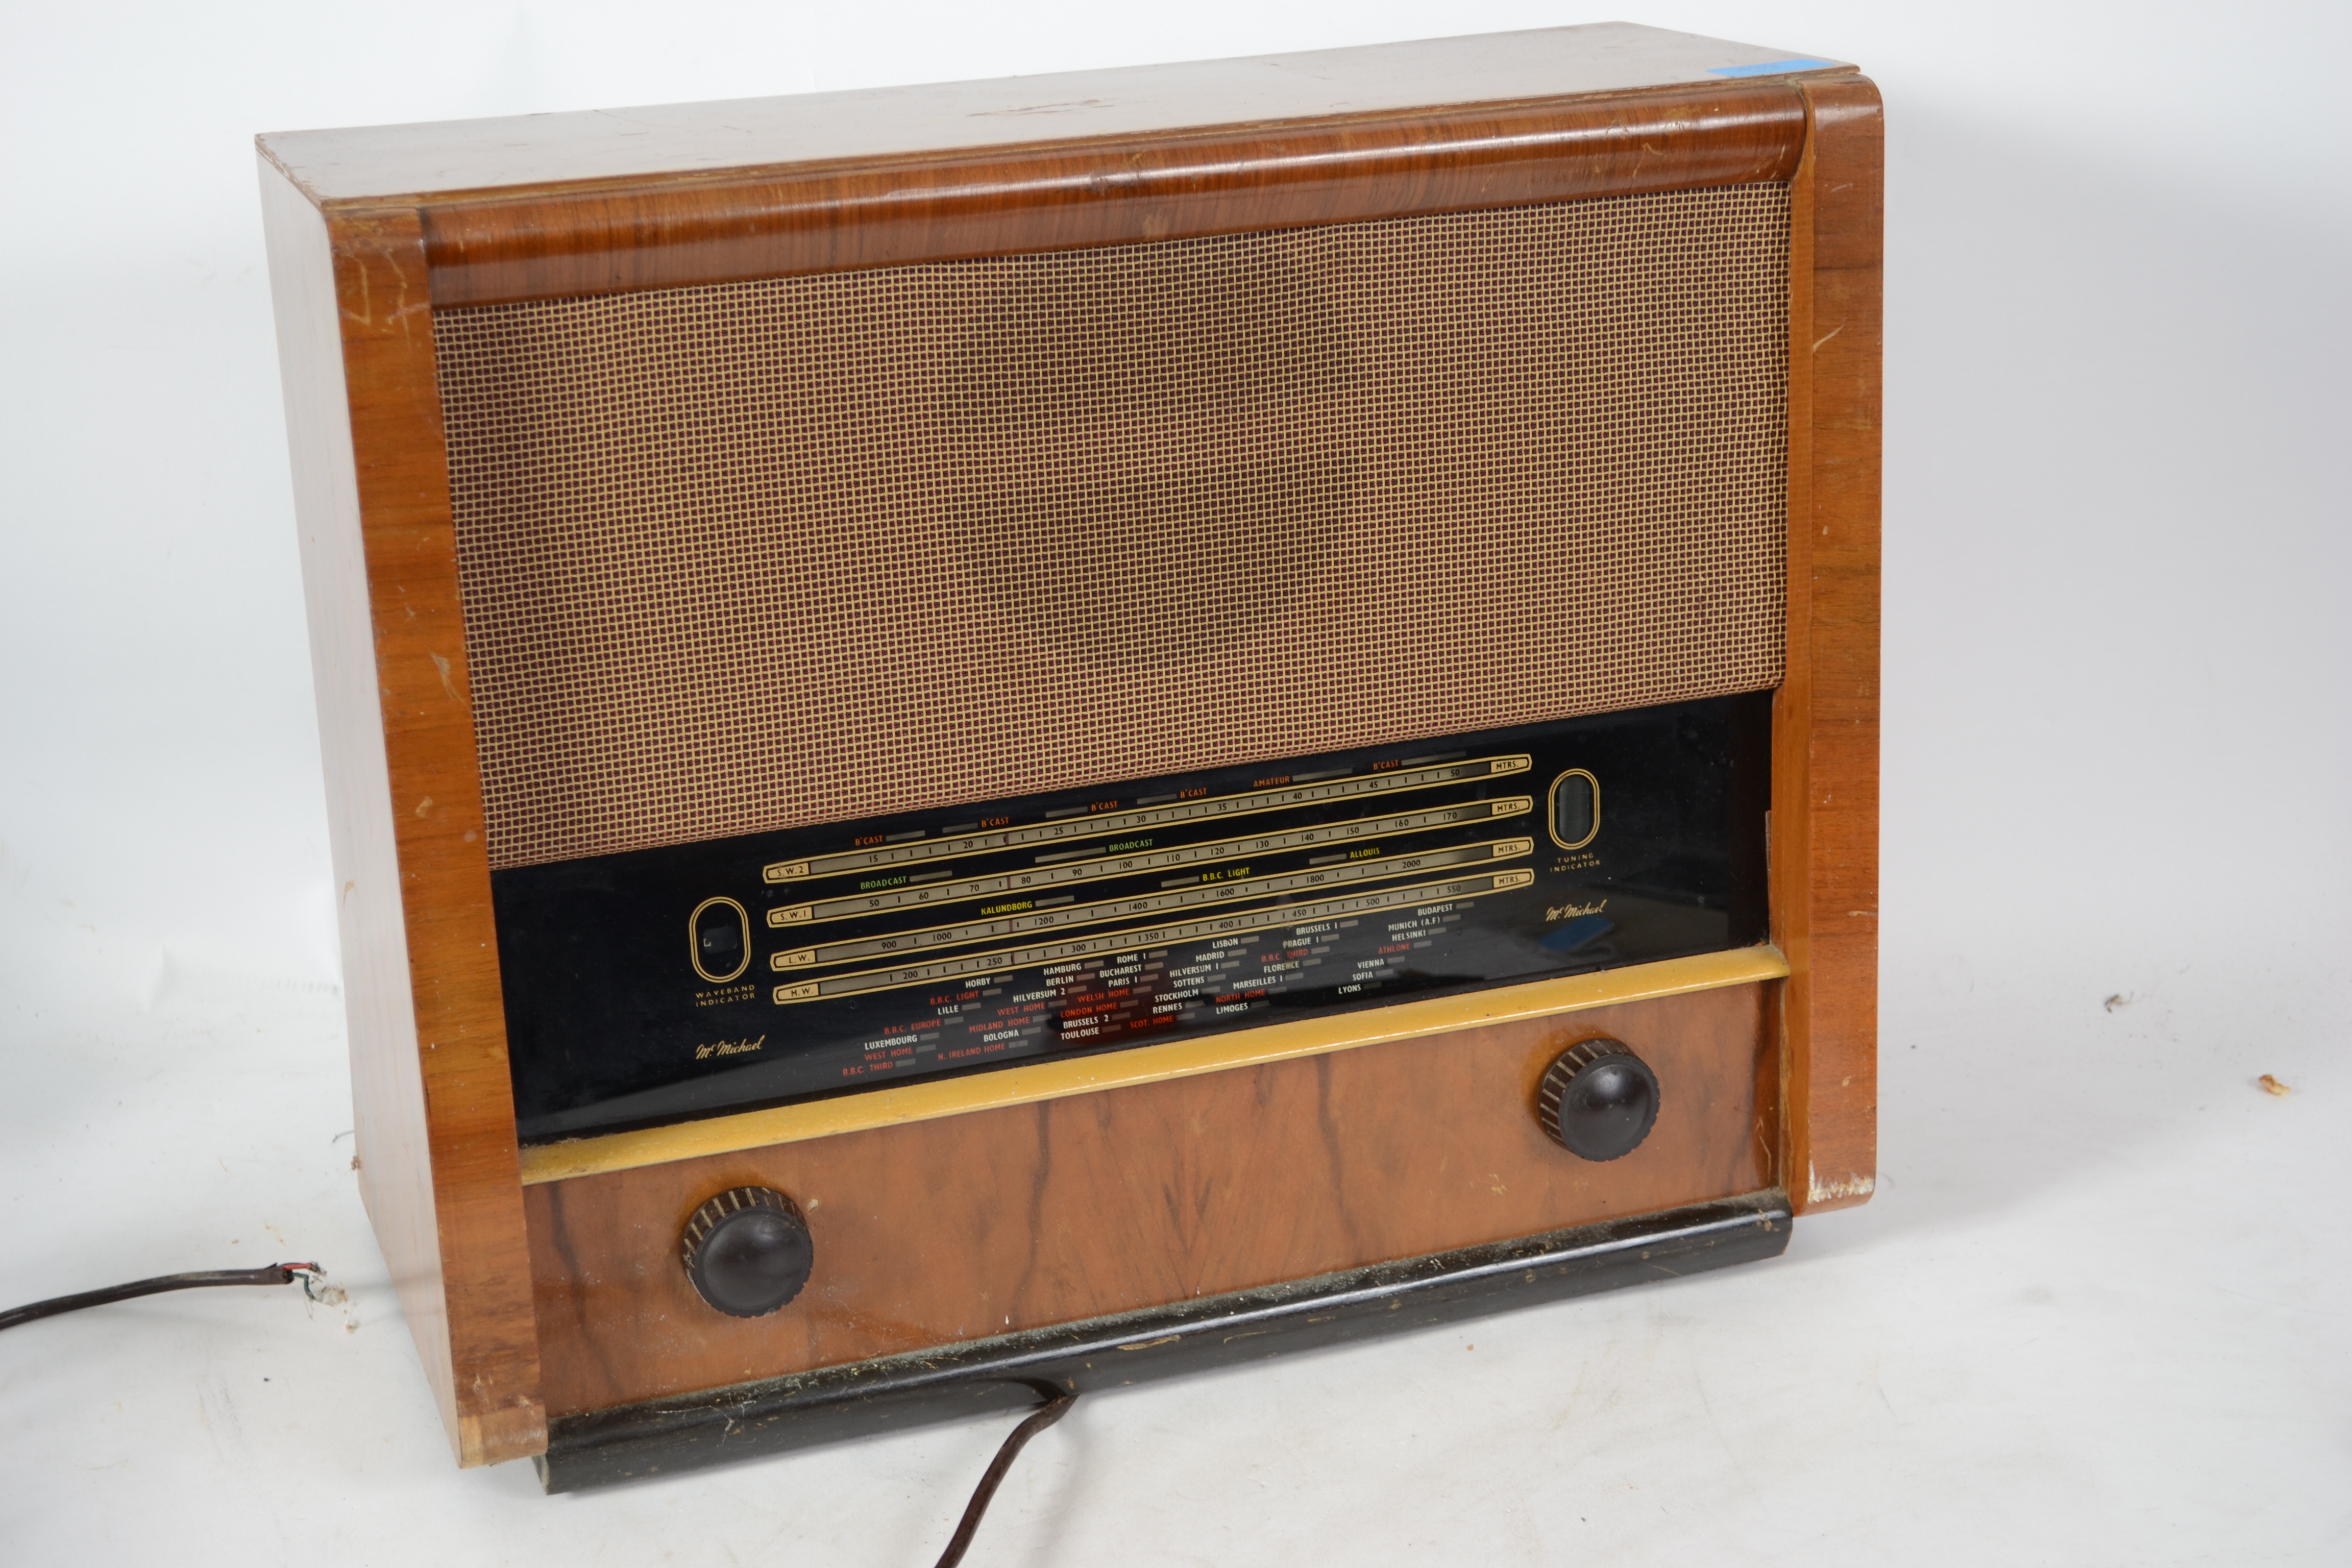 A vintage 20th century Art Deco walnut cased radio by McMichael having a decorative face within